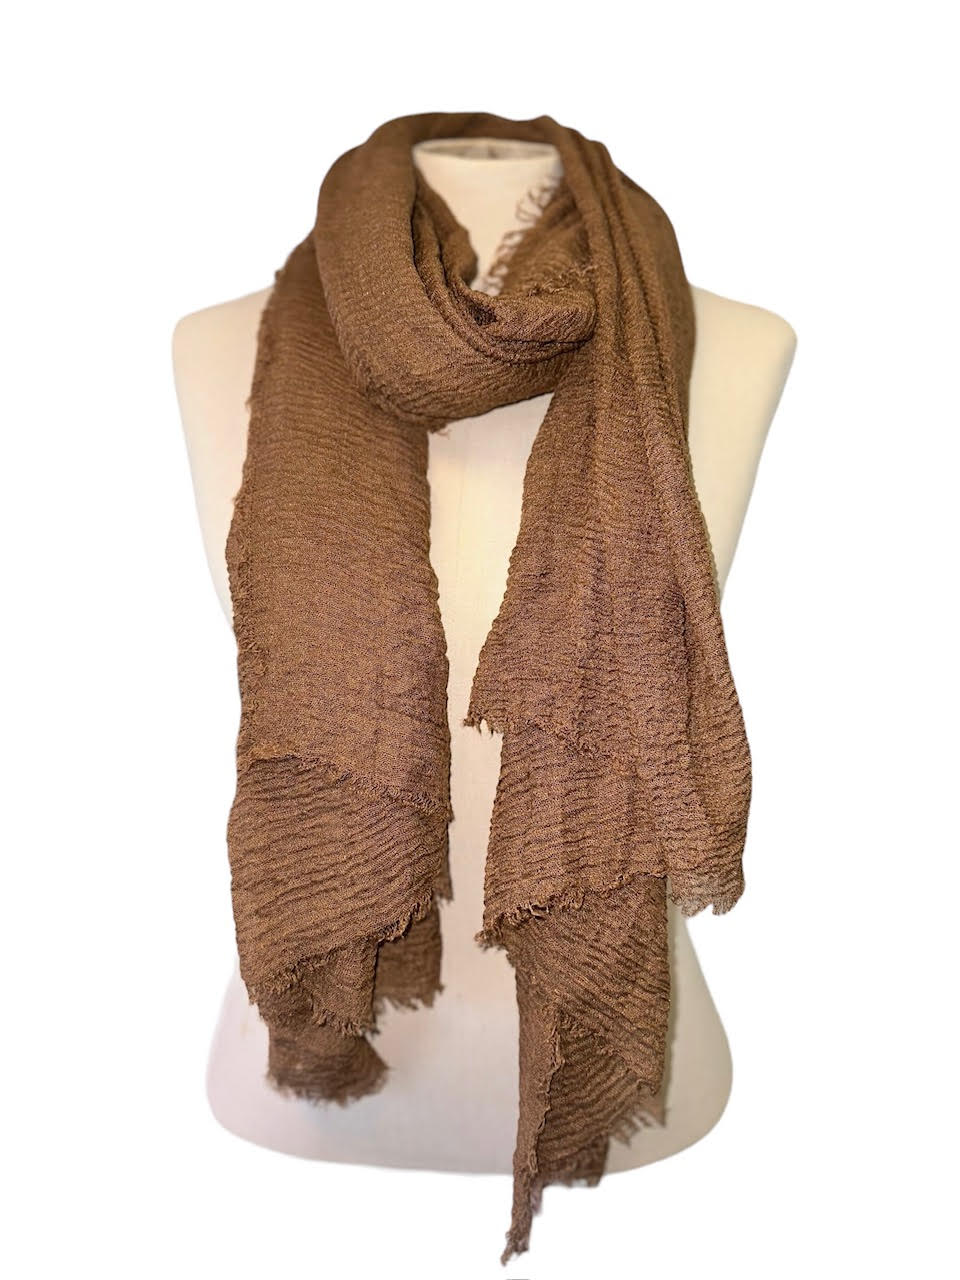 Wrap/Scarf in coffee by Market Co